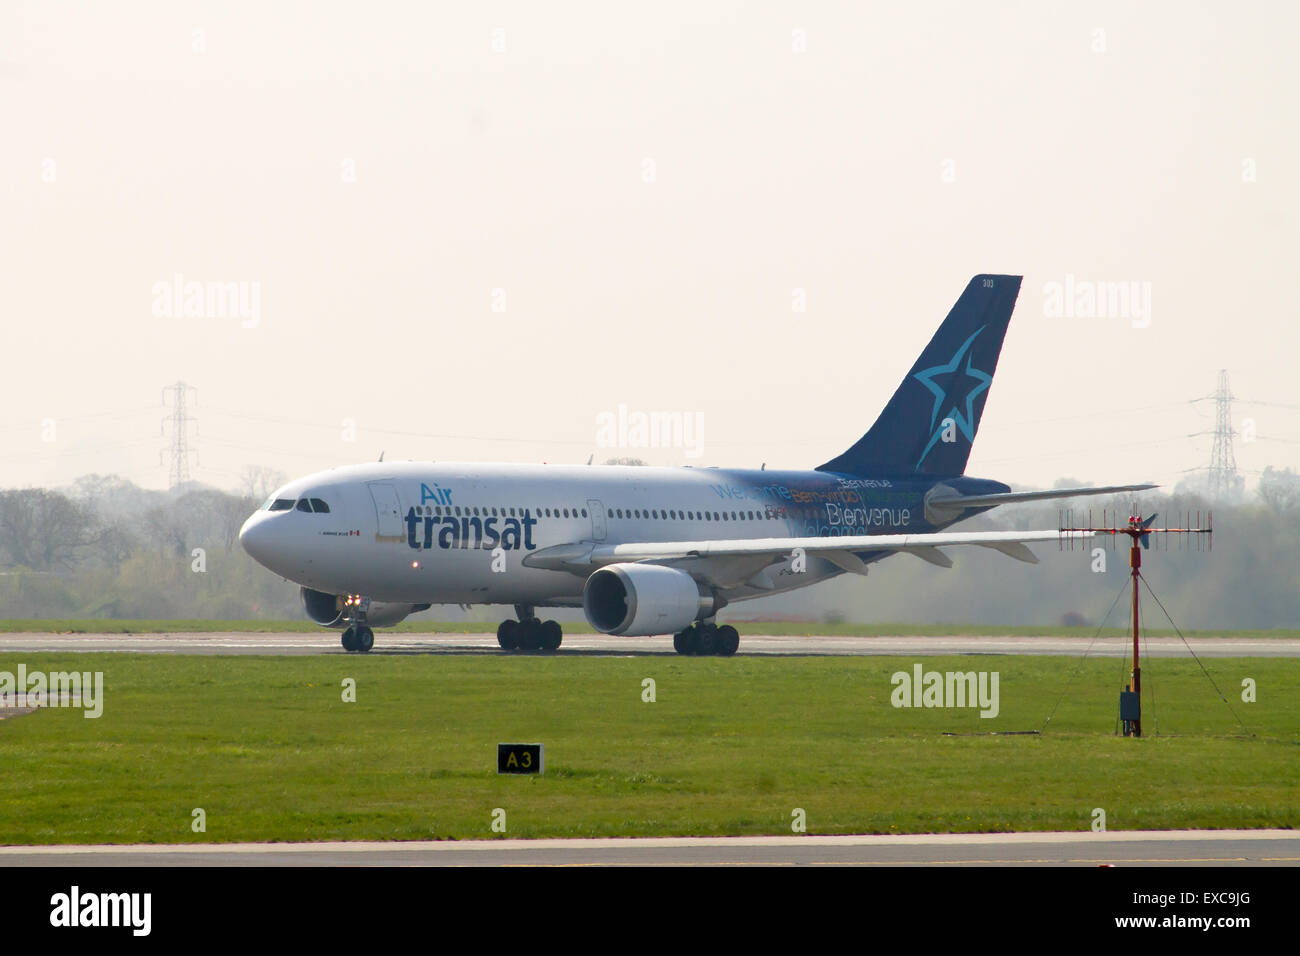 Air Transat Airbus A310 departing from Manchester International Airport. Stock Photo